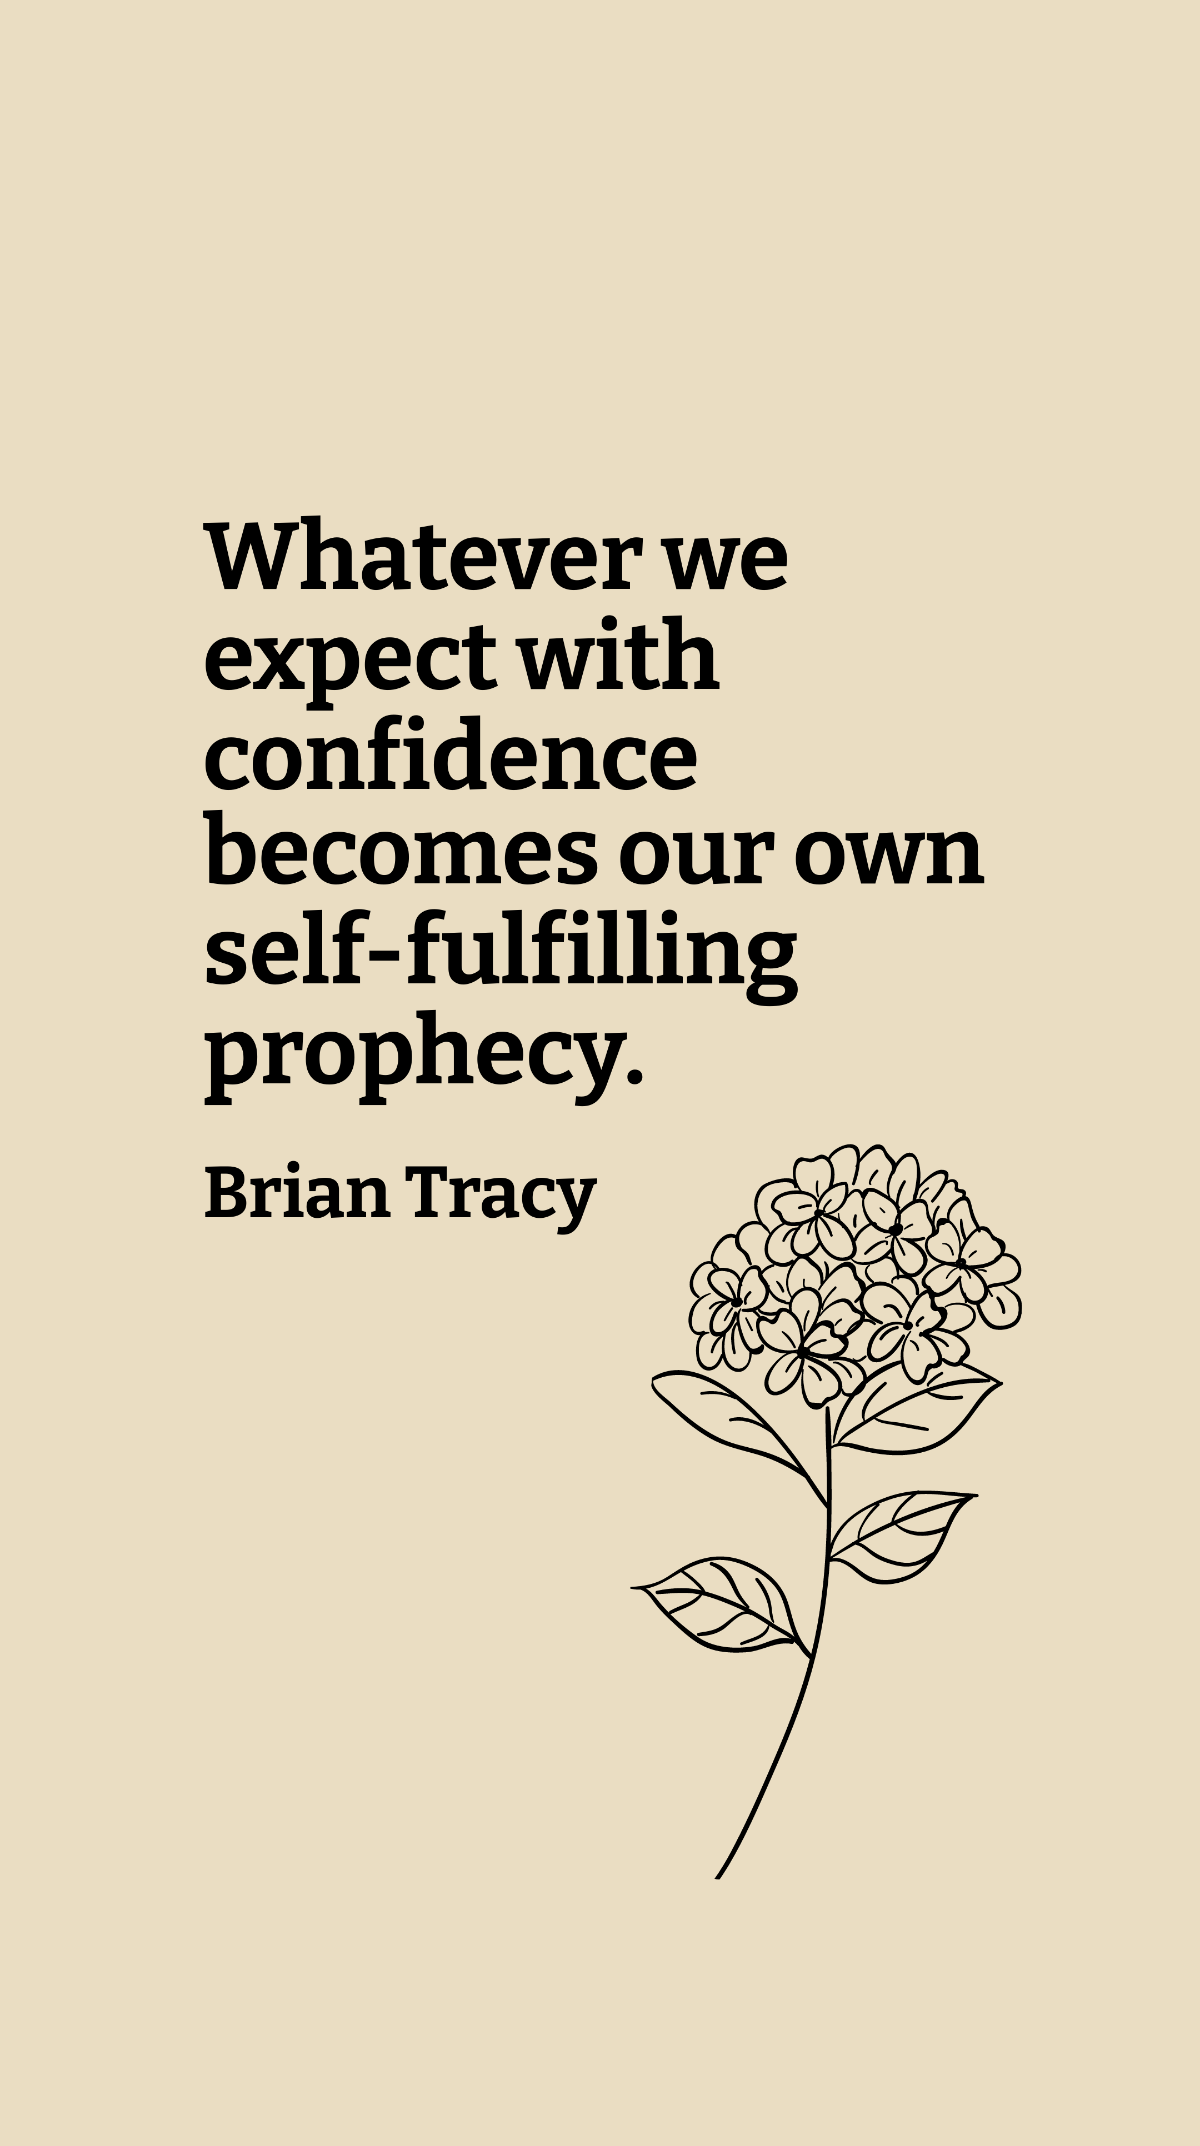 Brian Tracy - Whatever we expect with confidence becomes our own self-fulfilling prophecy. Template